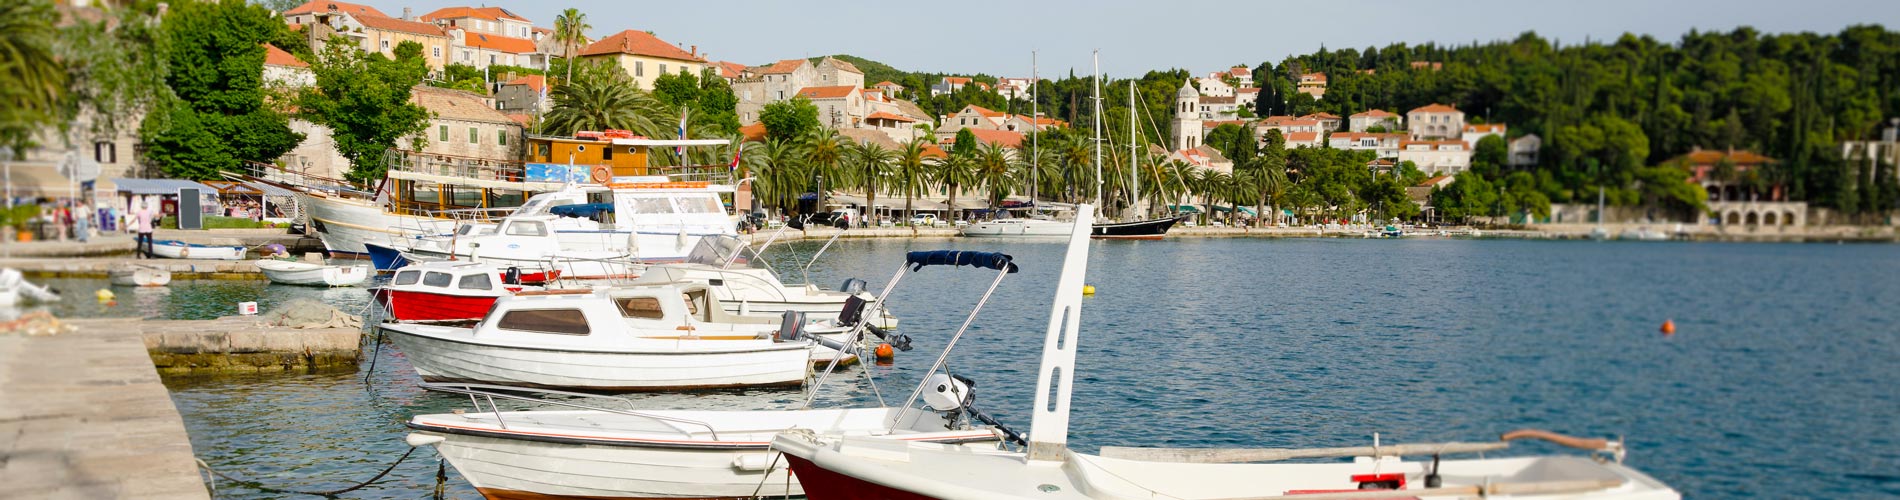 View of small boats and yachts in Cavtat Harbor,.jpg